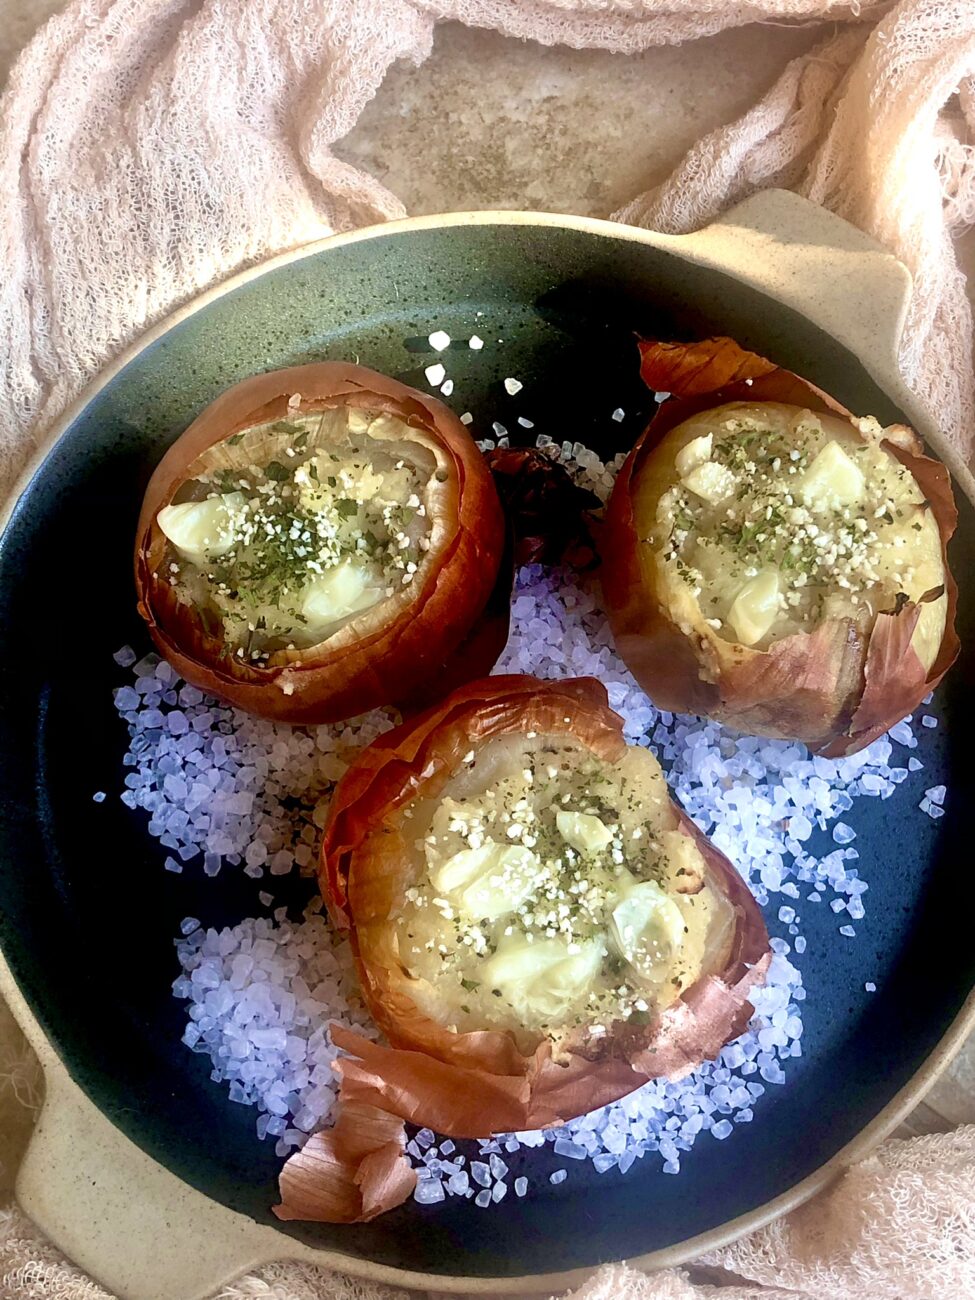 Filled Onion cooked in salt